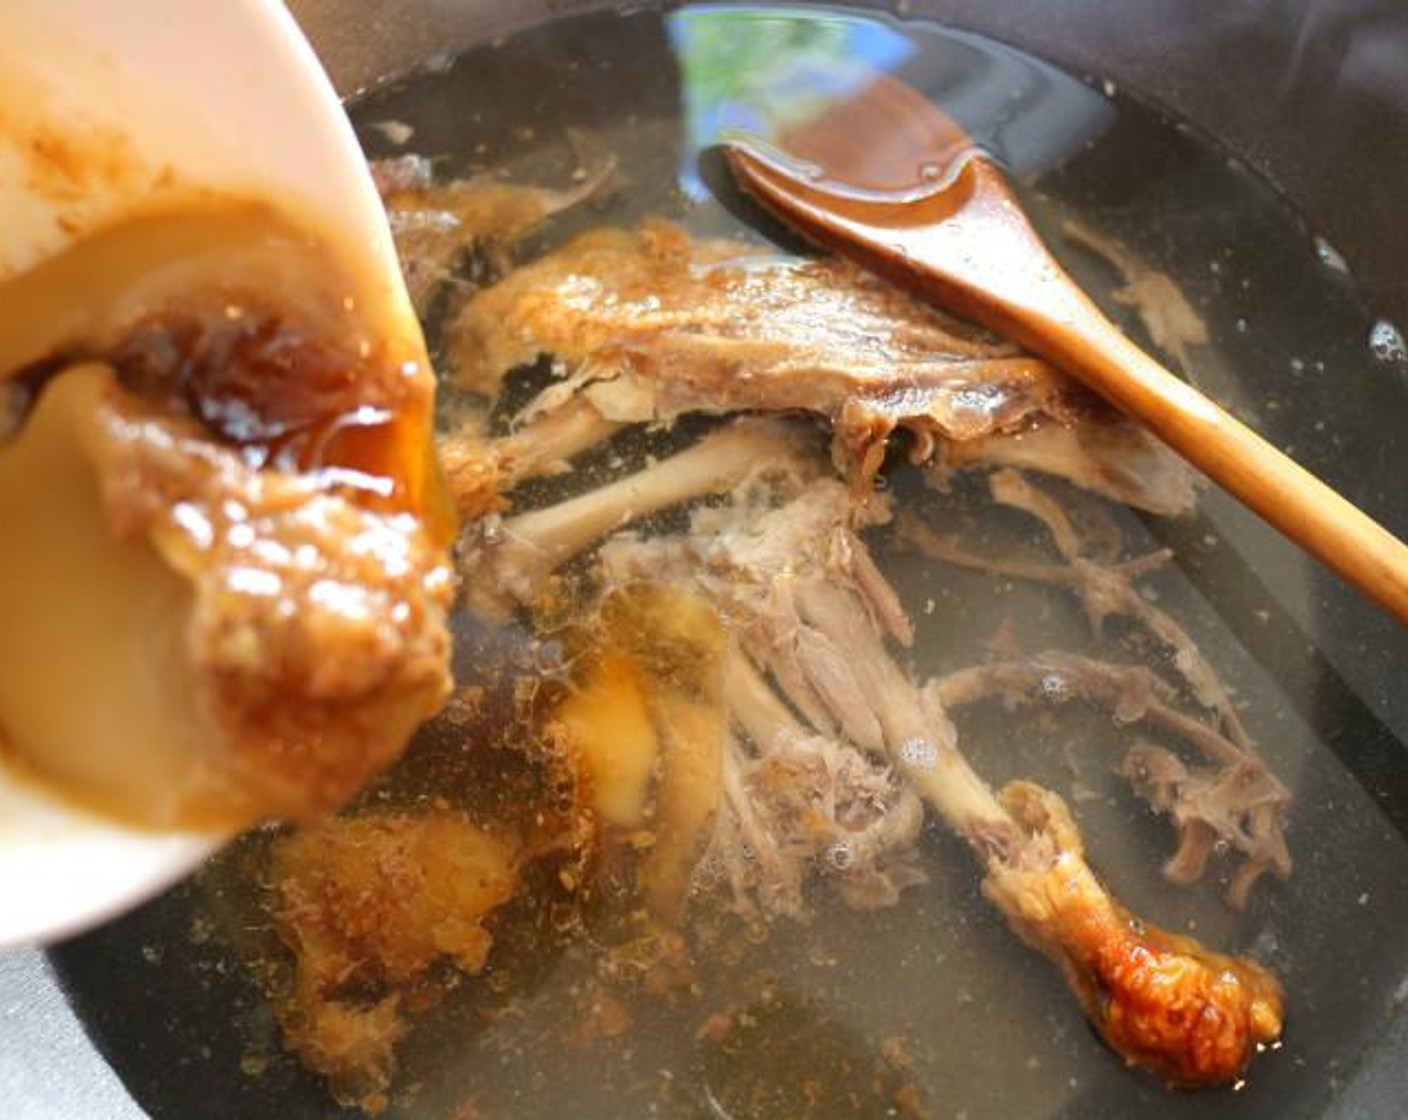 step 6 Add the duck bones, the skin and scraps to Chicken Stock (4 cups), add all the juices and 2 tablespoons of duck fat that have collected when roasting the duck. Simmer for 30 minutes or until there is 1/2 quart stock left.